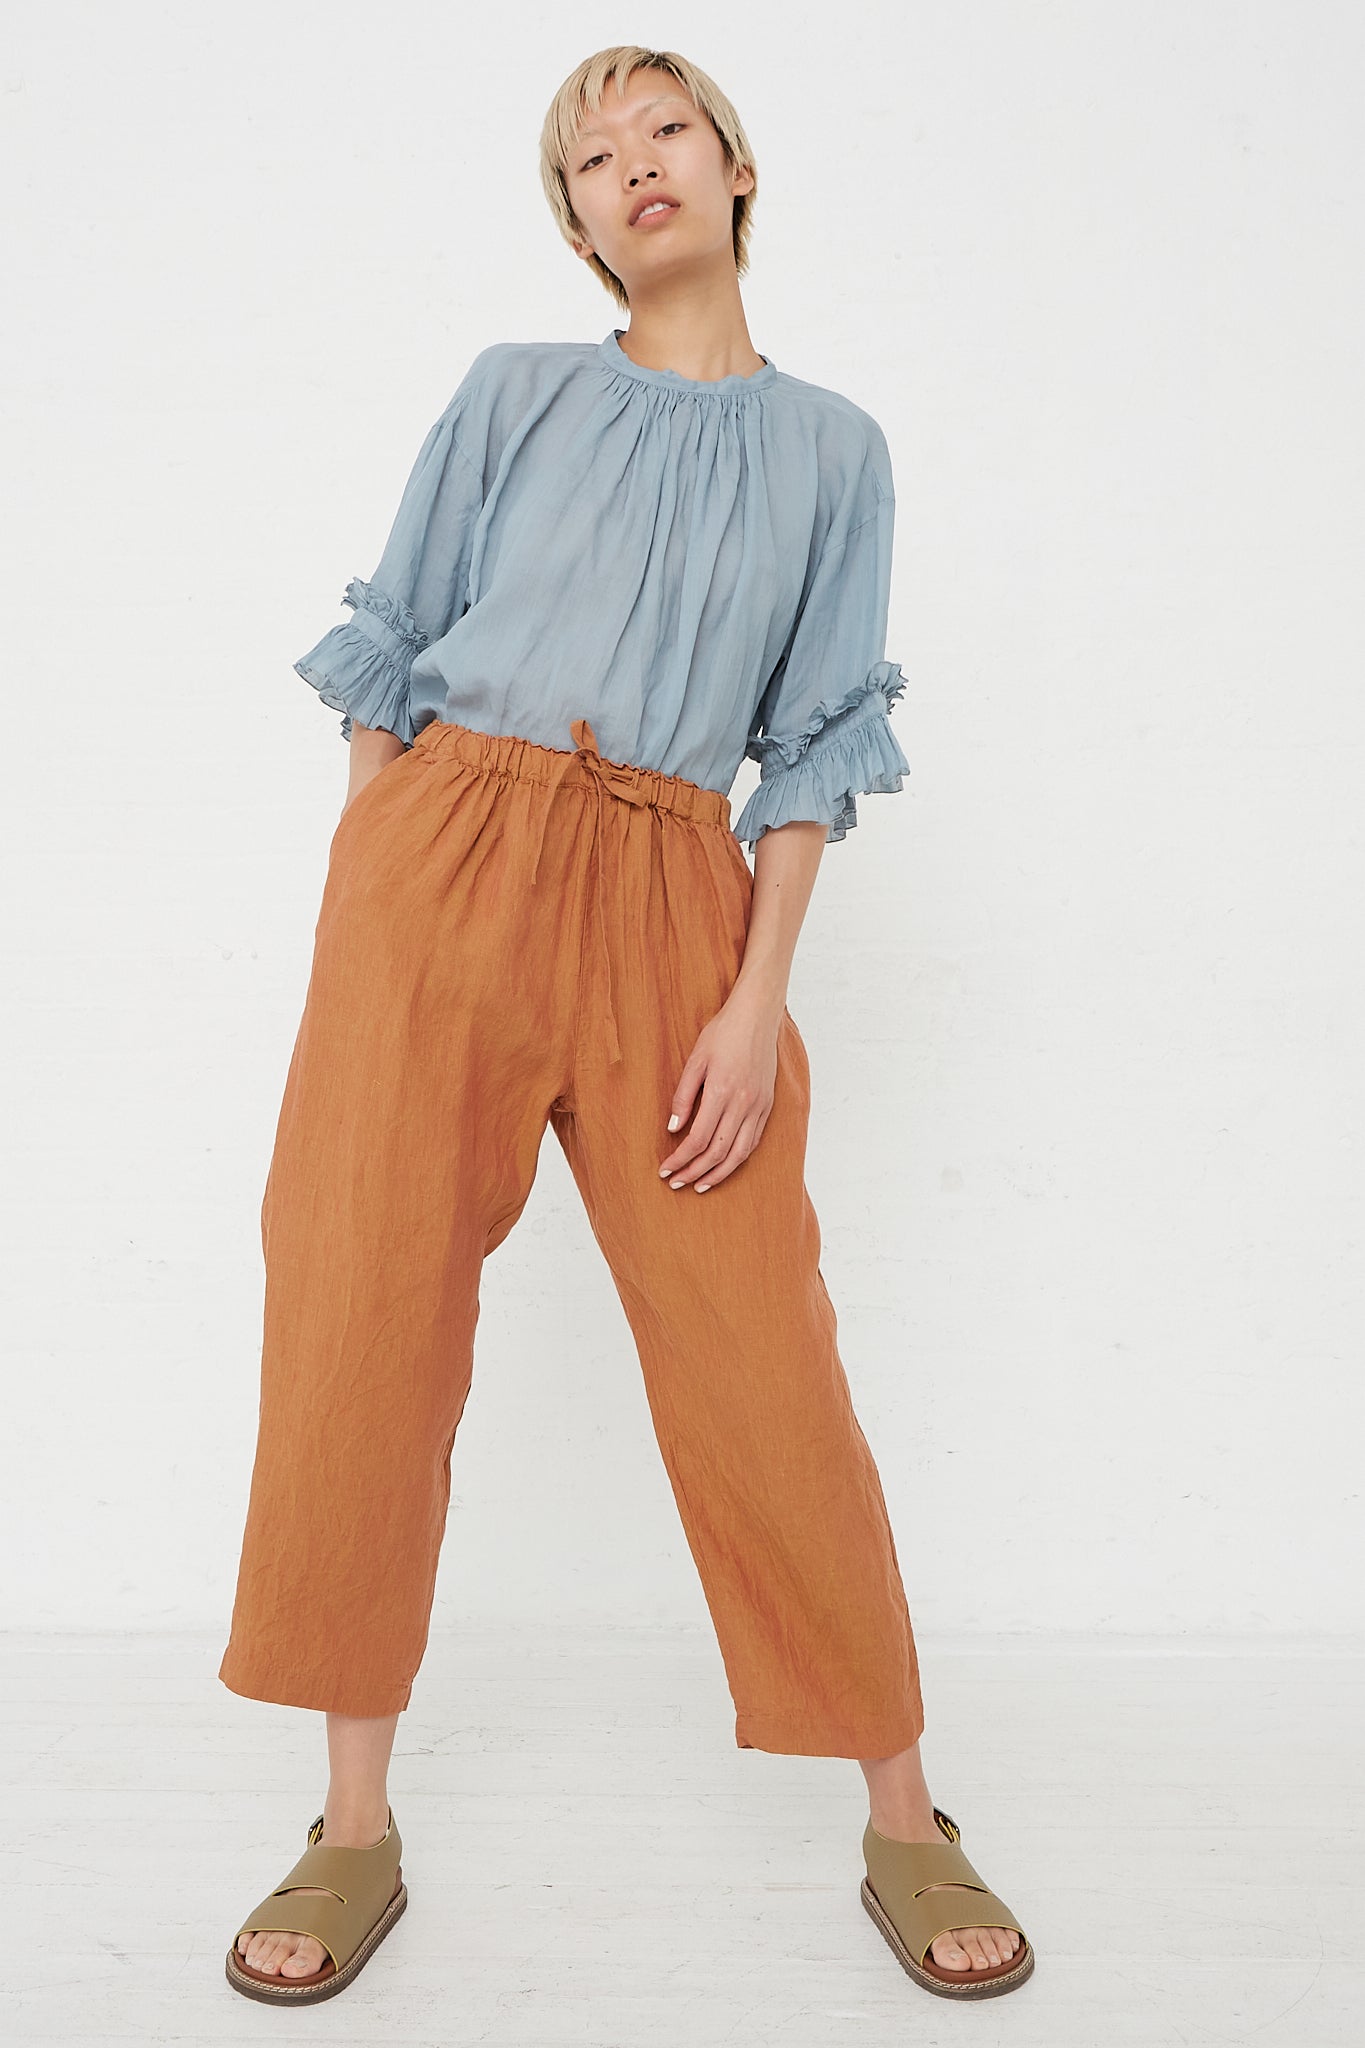 nest Robe - Hemp Yarn Dyed Easy Fit Pant in Brick front view